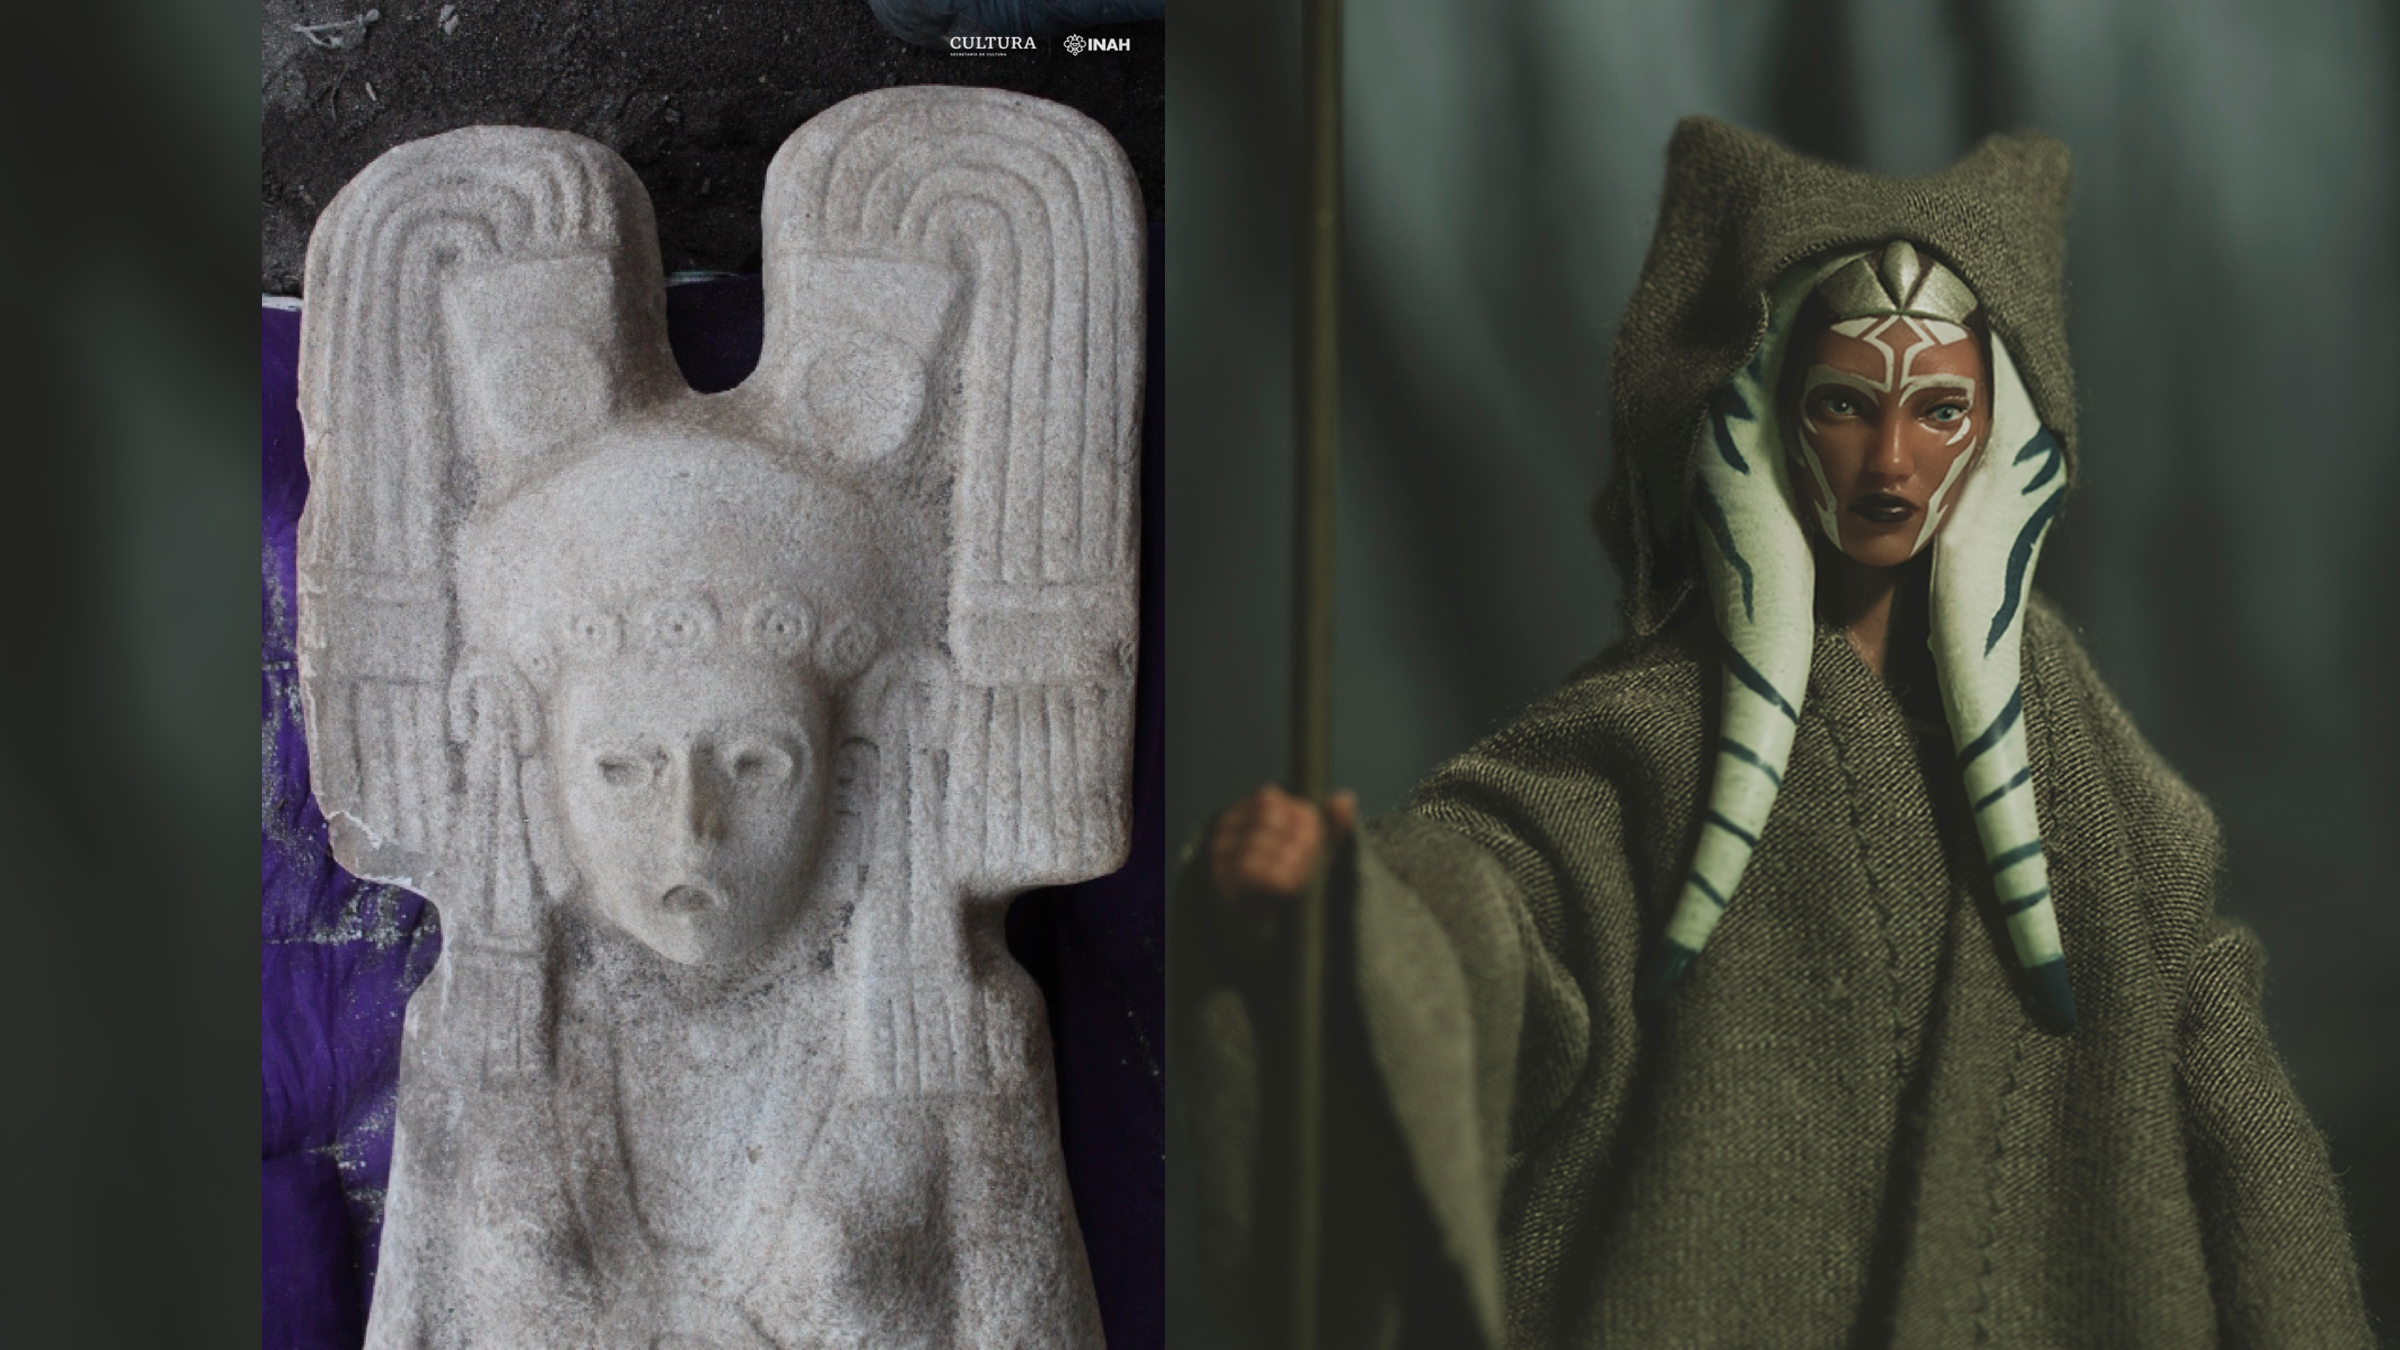 Statue of mysterious woman with 'Star Wars'-like headdress found in Mexico